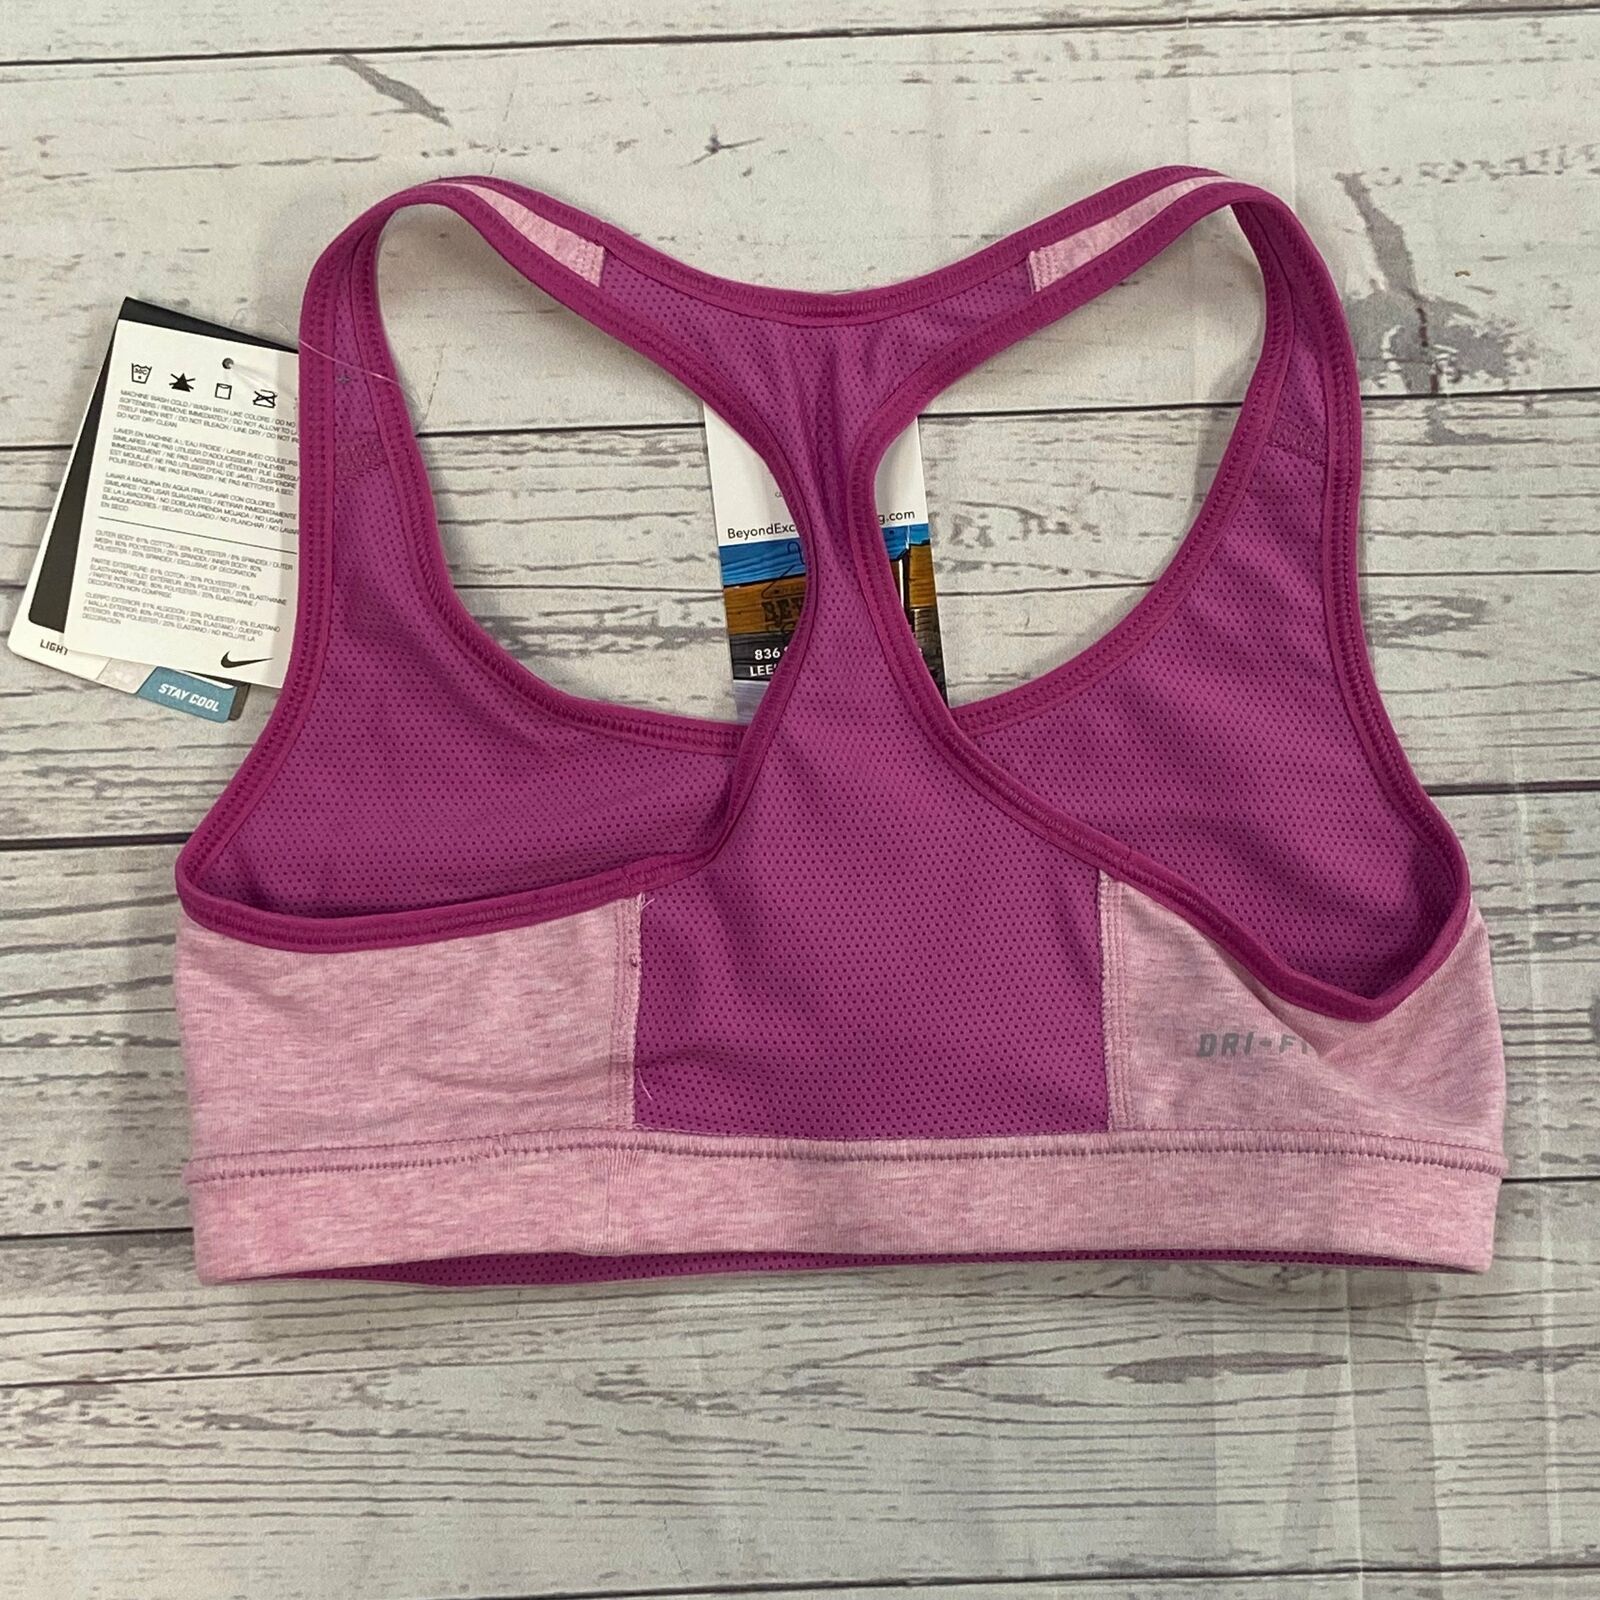 Nike Pink Light Support Reversible Sports Bra Woman's Size XS NEW - beyond  exchange